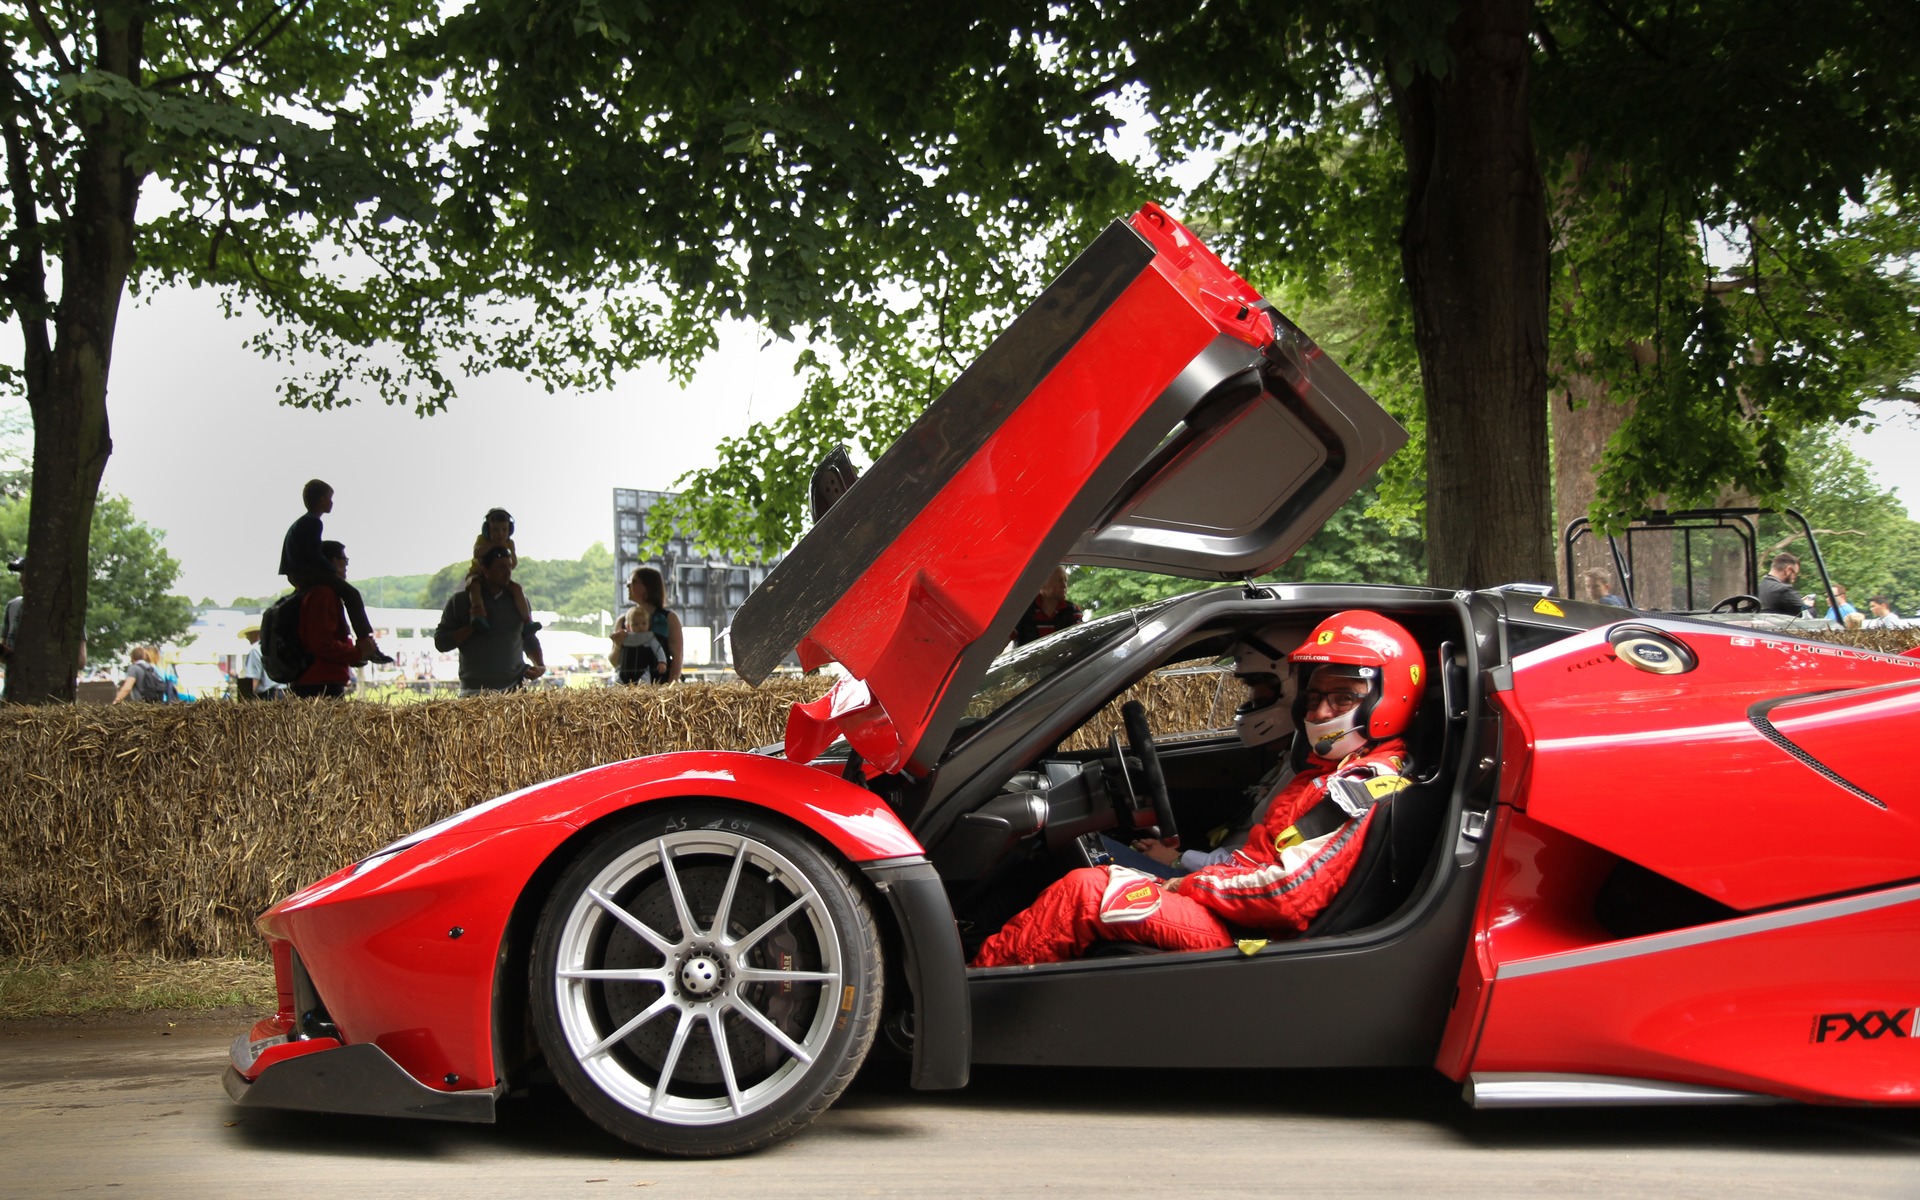 Ferrari FXX in action at the Festival of Speed 2016